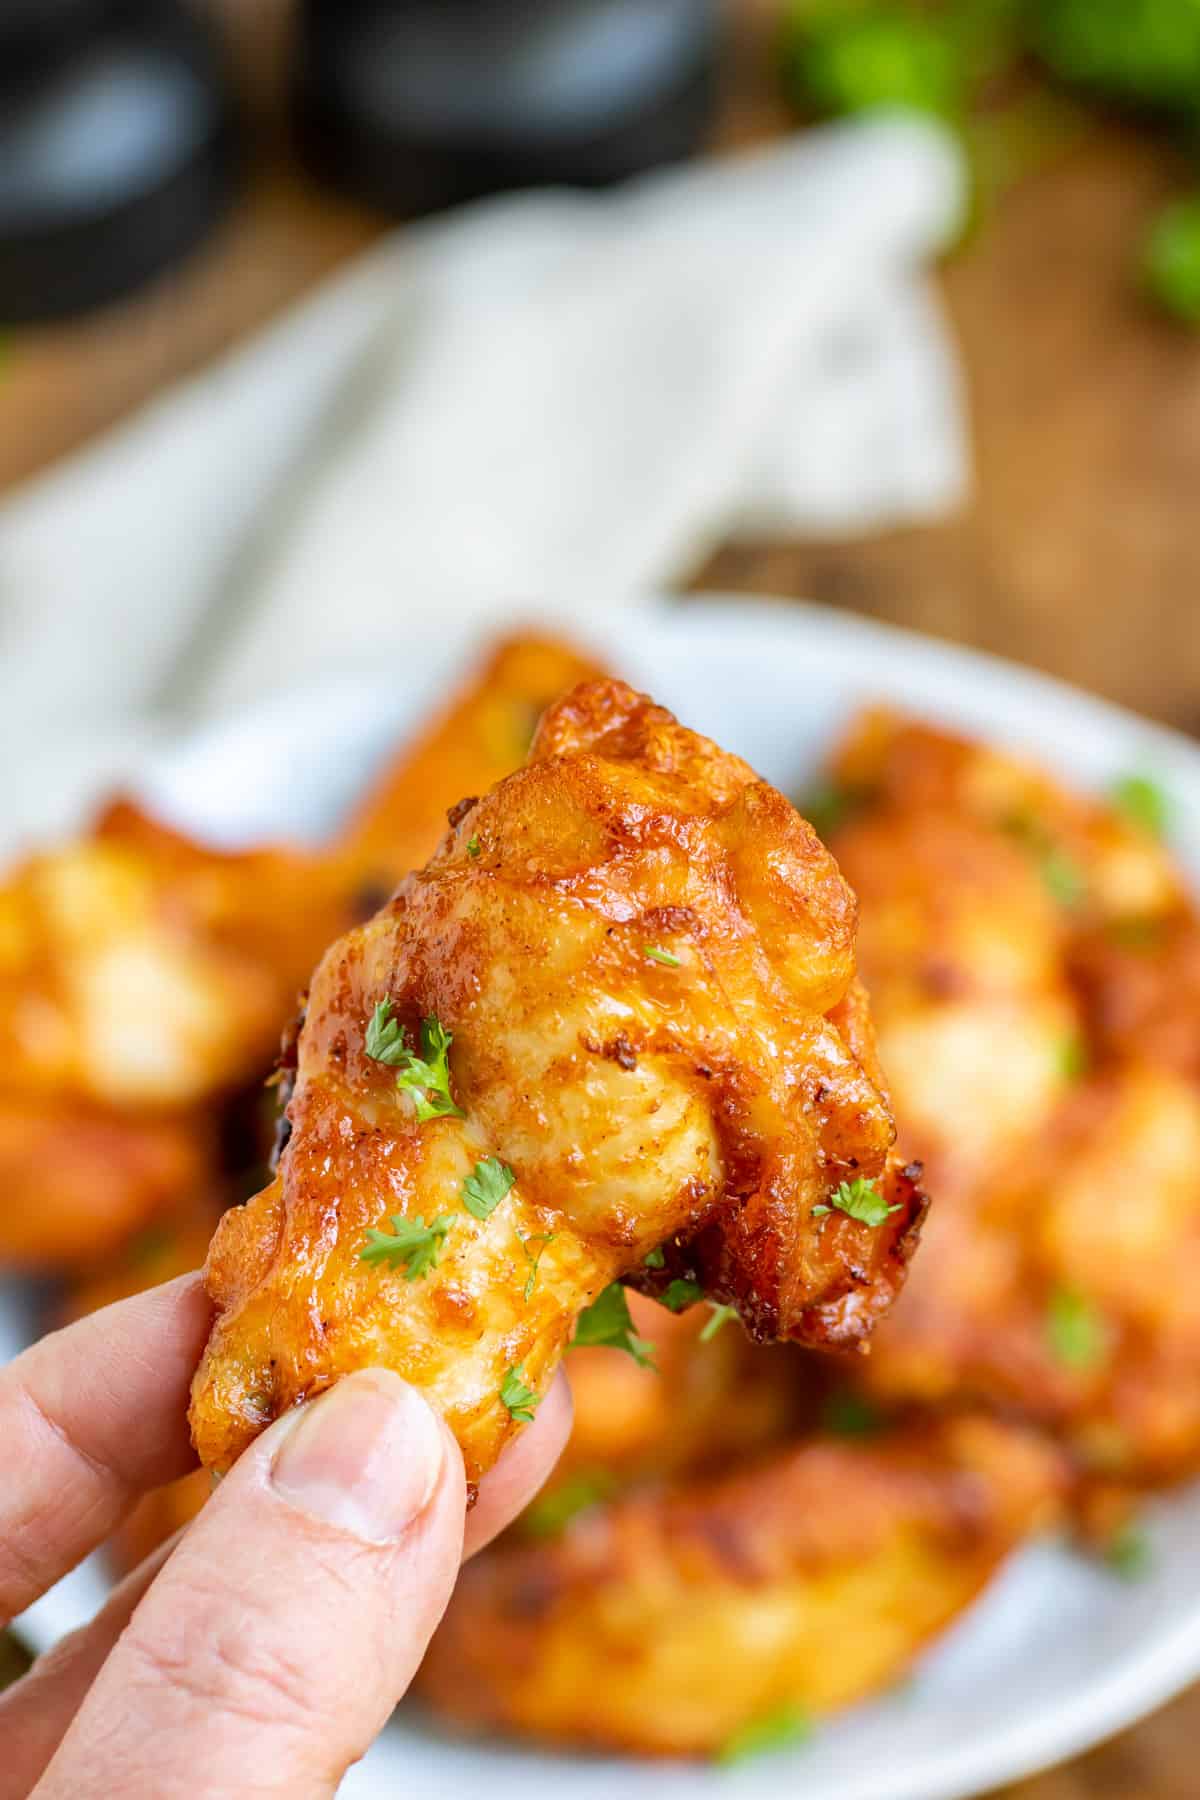 A hand holding up a cajun spiced chicken wing.